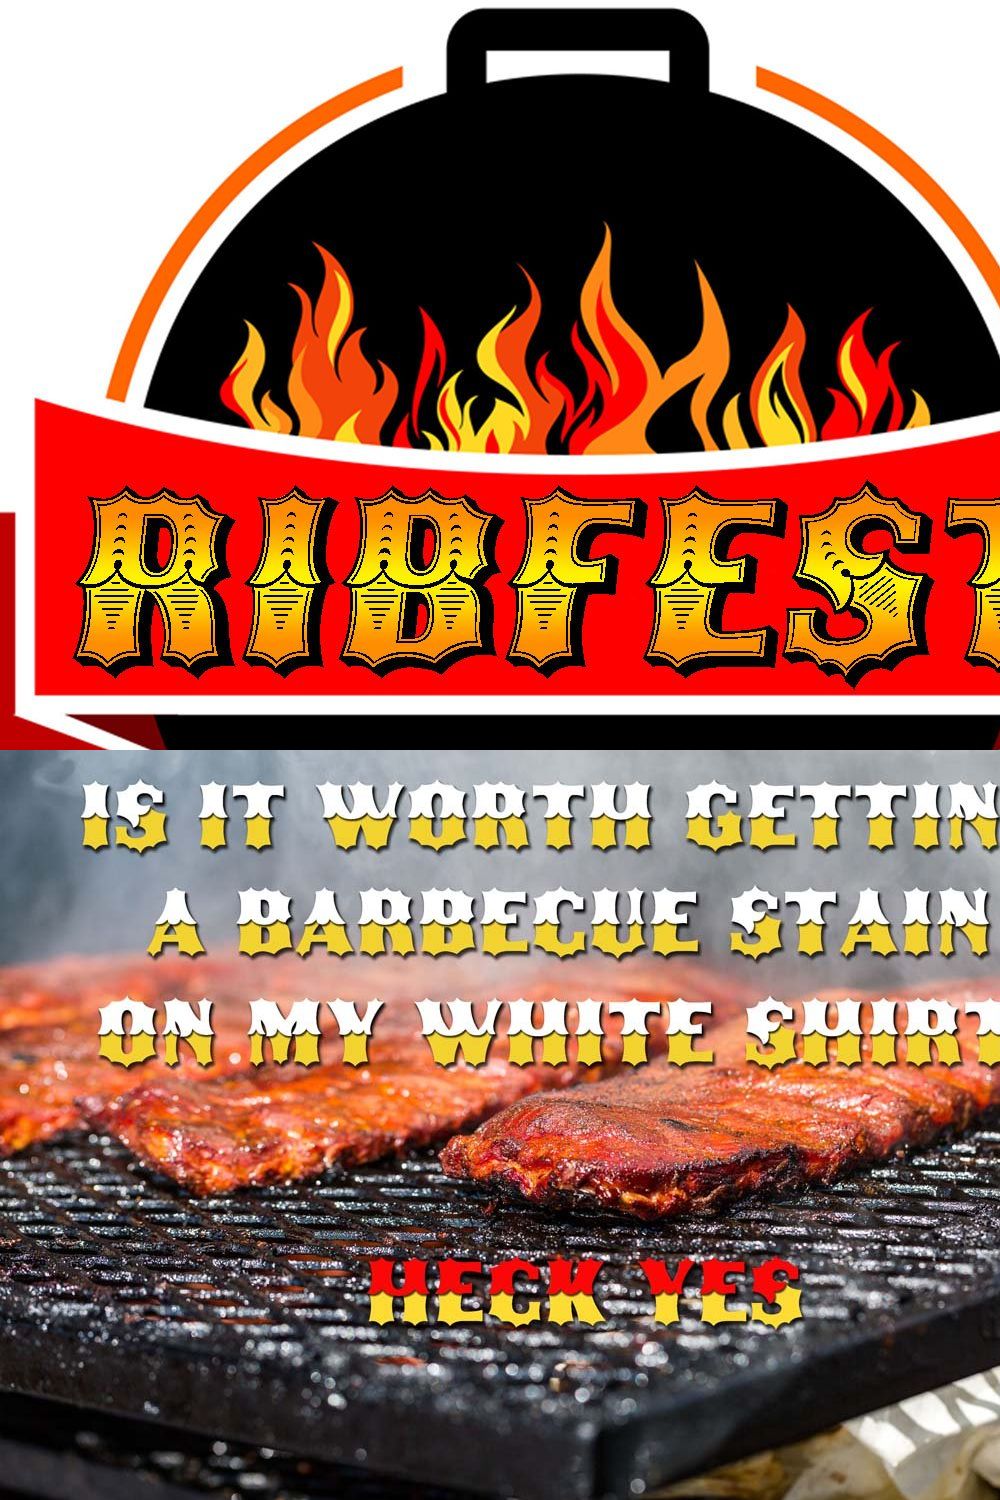 Ribfest pinterest preview image.